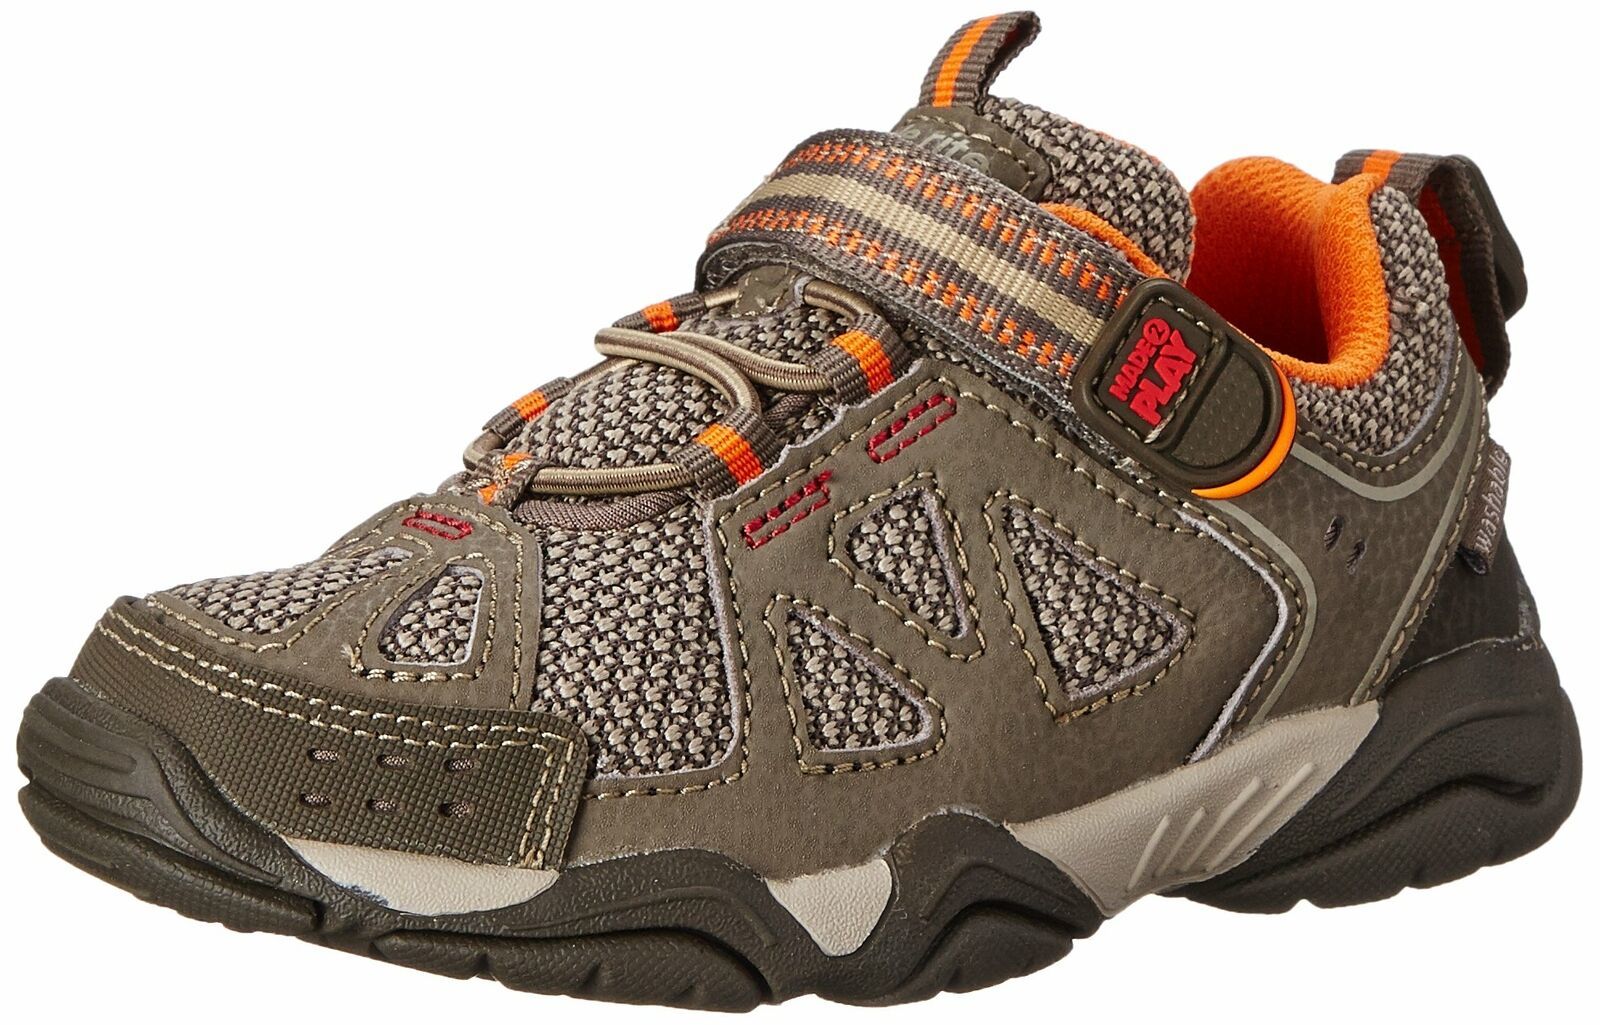 Stride Rite Made 2 Play Ian Sneaker (Toddler/Little Kid) Size 4.5 Wide Toddler - $30.50